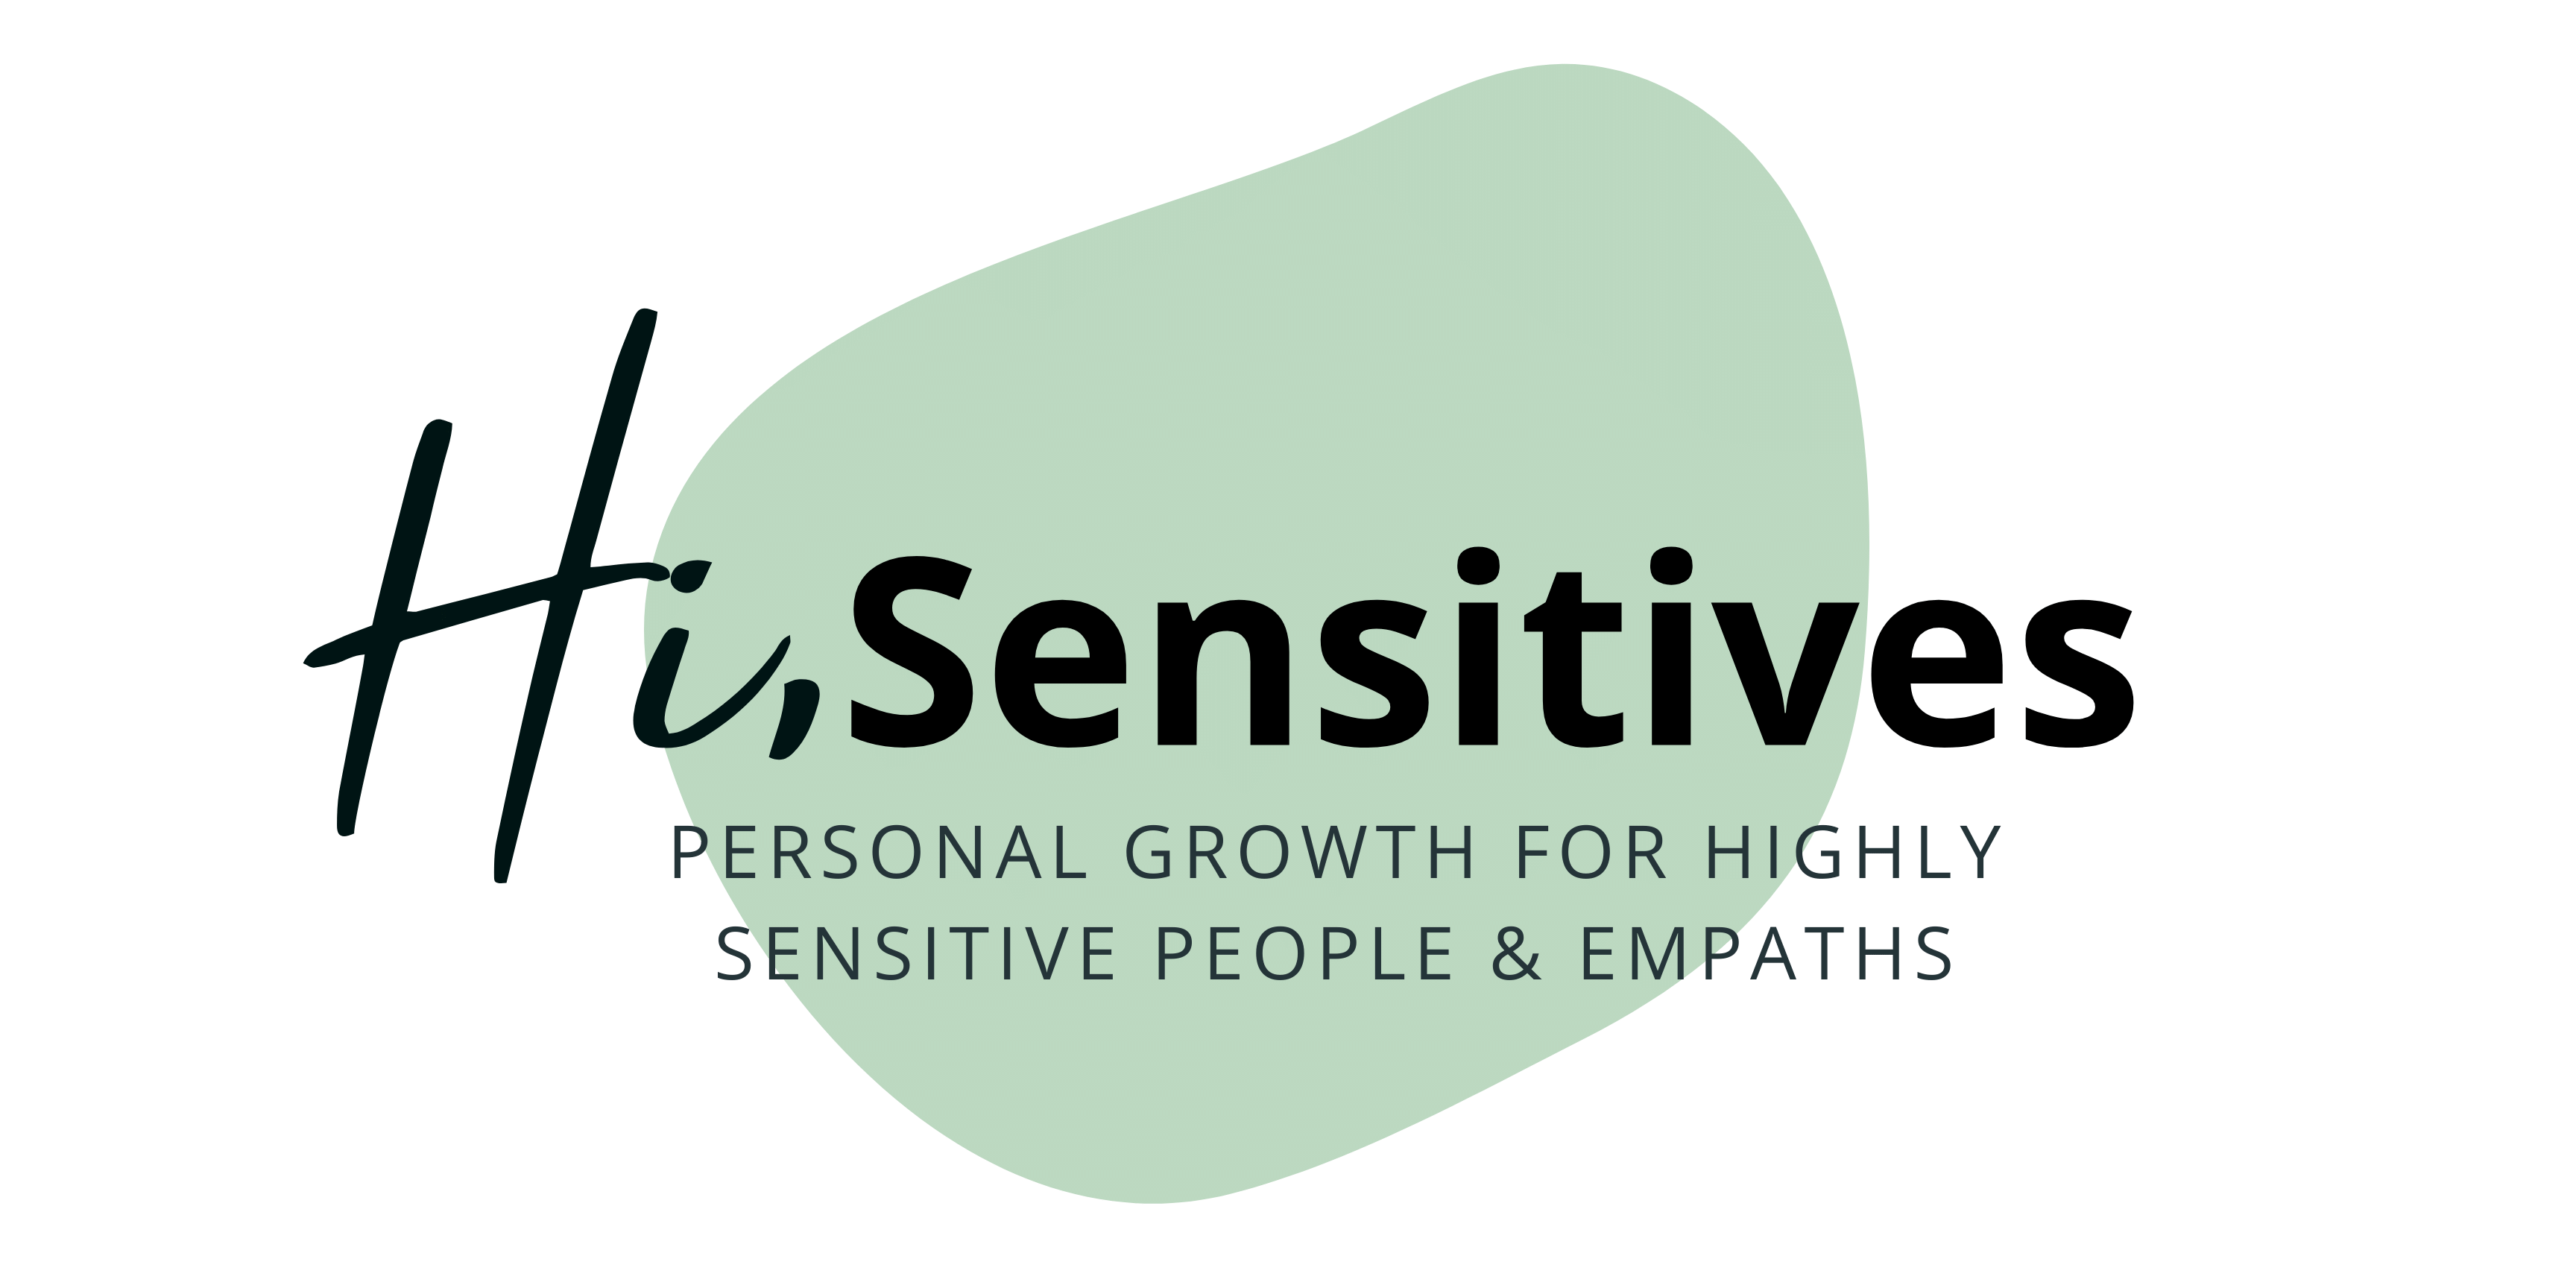 Highly Sensitive and Wonderfully Made